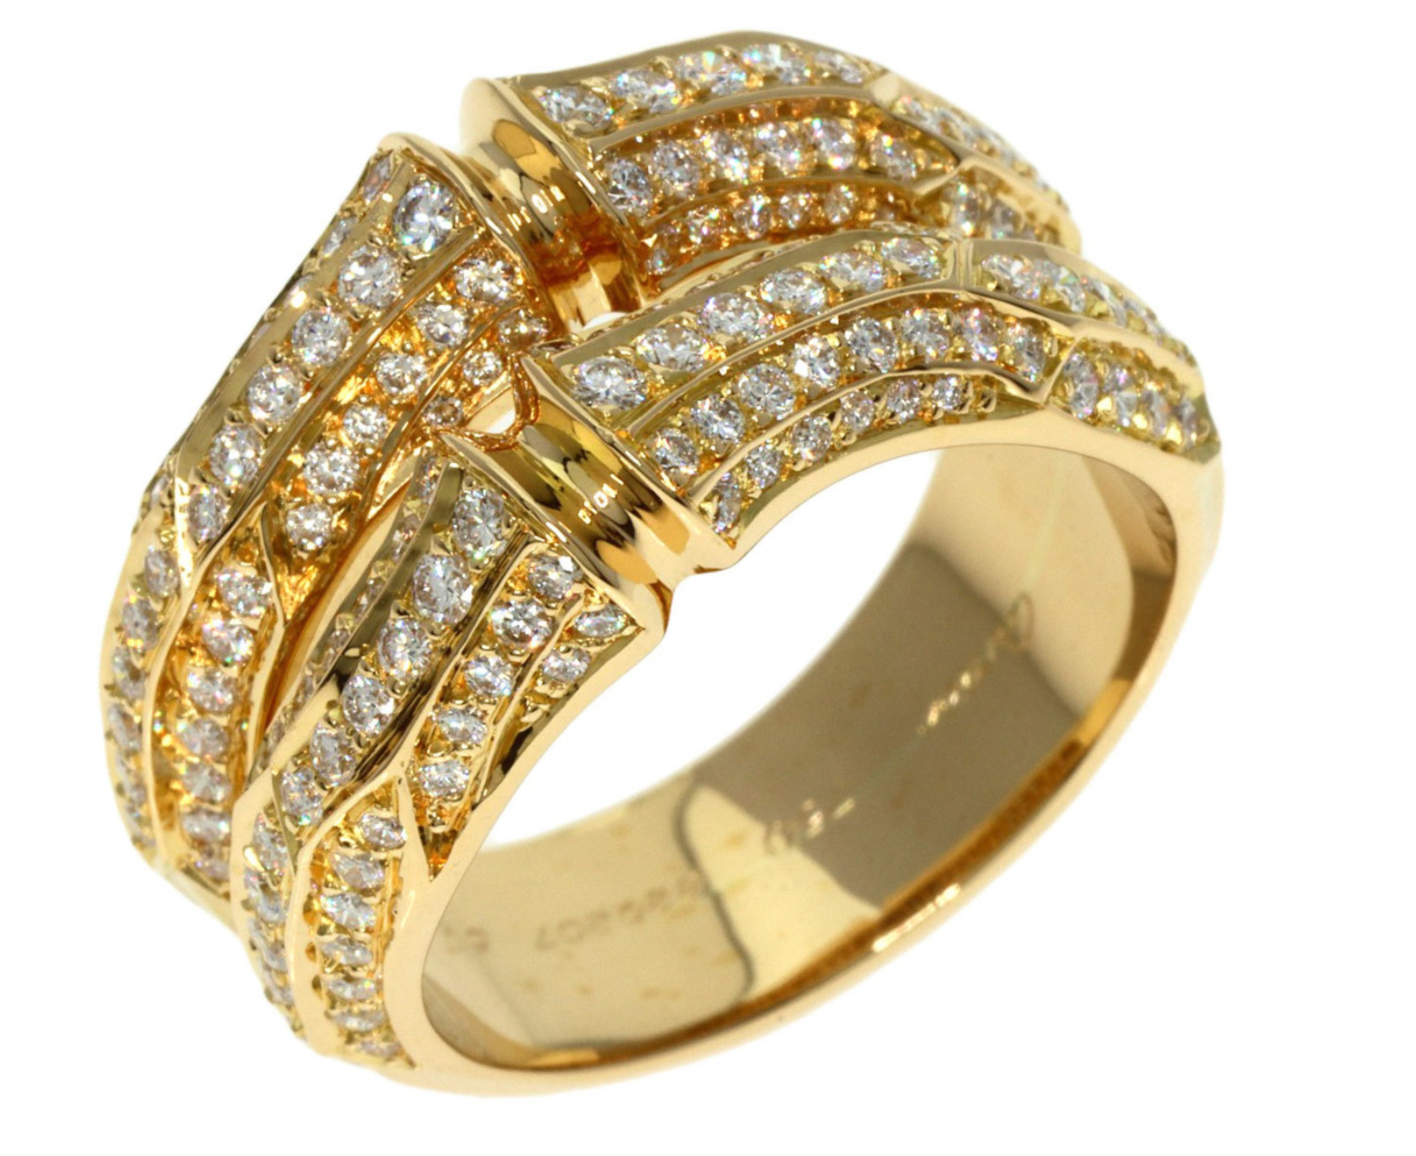 Pre-owned 18k yellow gold ring from Cartier Bamboo collection set with 1.65ctw of diamonds